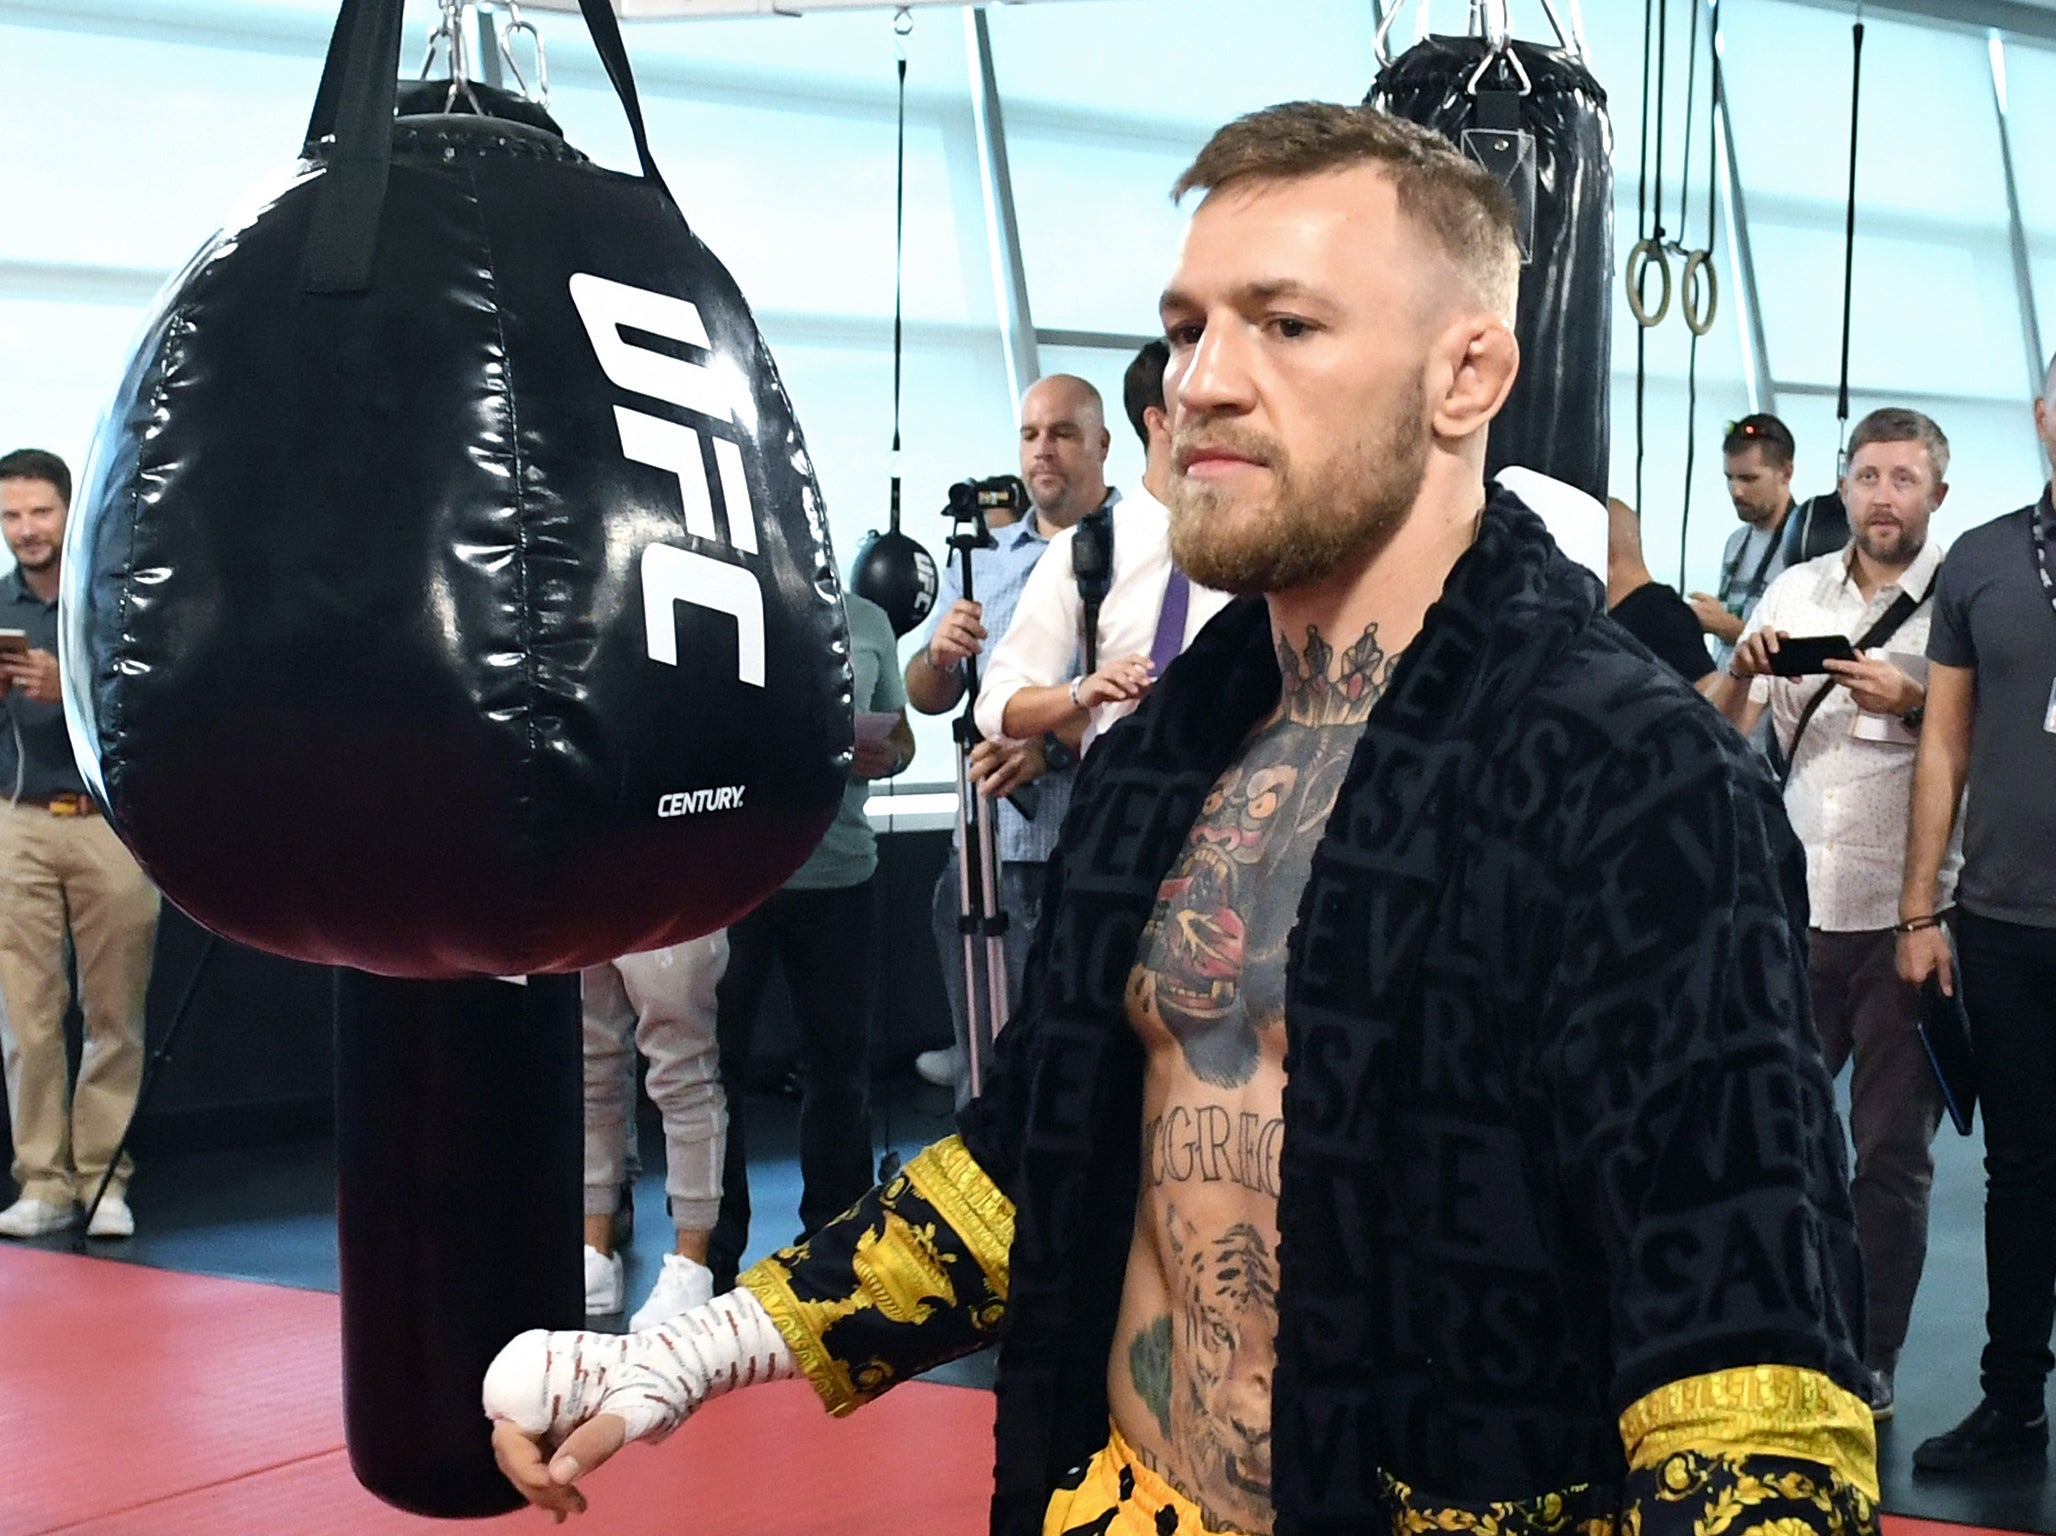 McGregor will be making his professional boxing debut